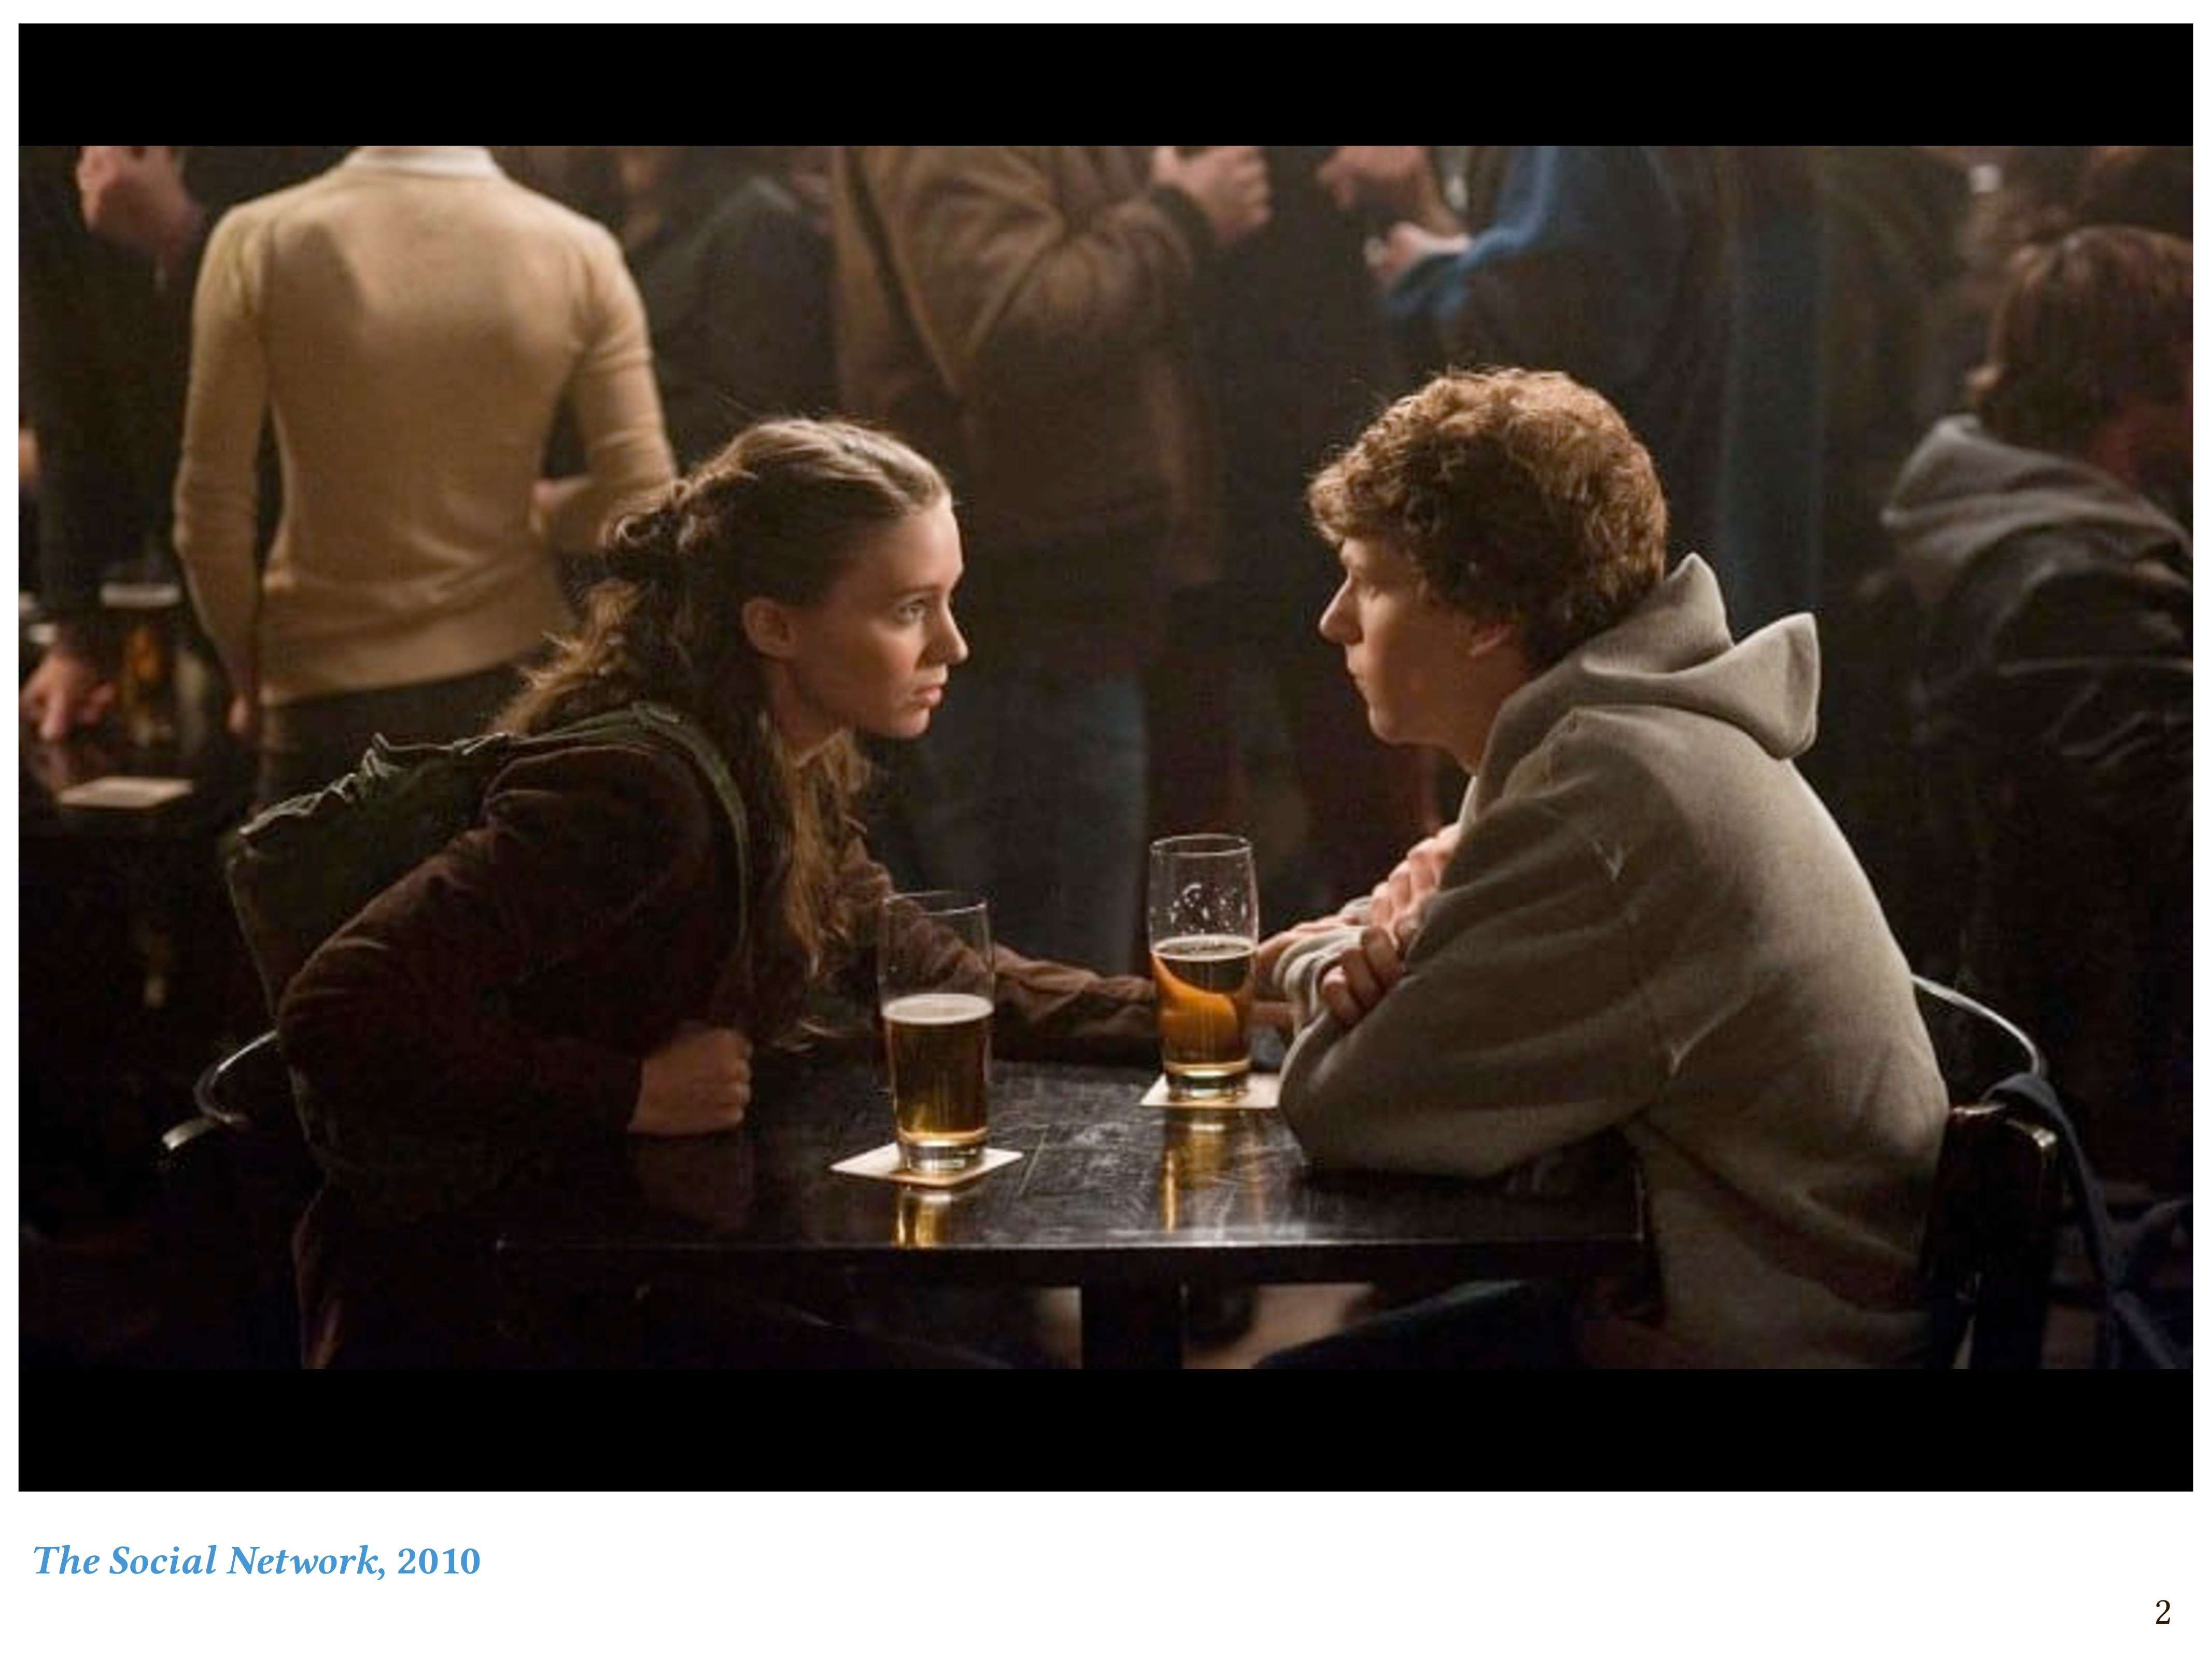 The opening scene from the movie _The Social Network_.  Mark and his soon-to-be-ex-girlfriend, Erica, are sitting in a dimly lit bar, arguing.